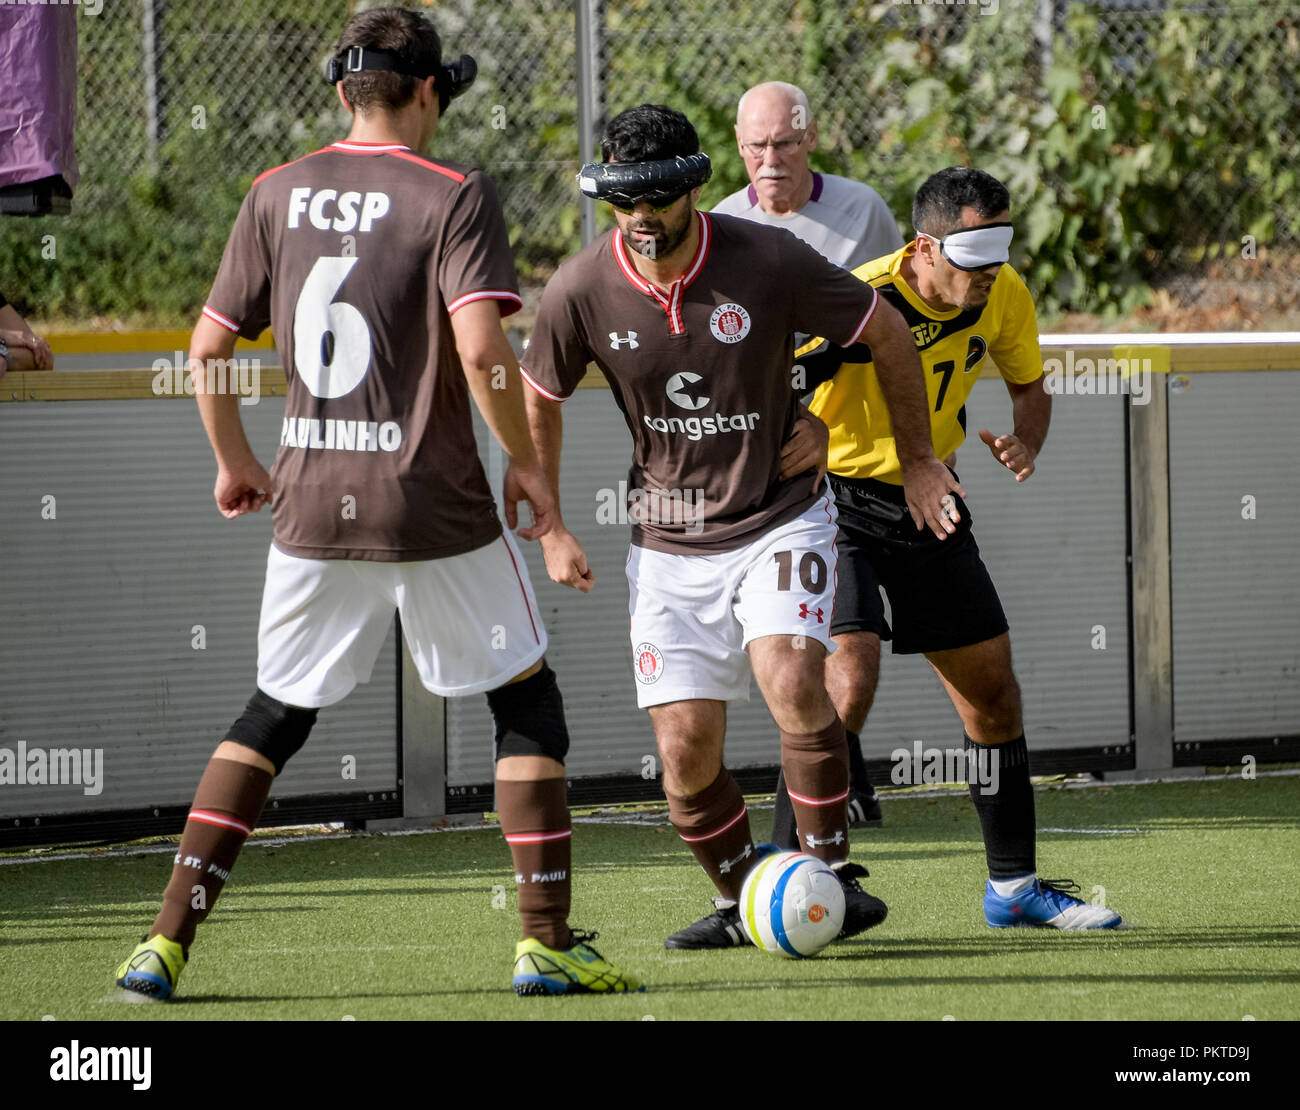 15 September 2018, Hamburg: Serdal Celebi (M), FC St. Pauli footballer for the blind, plays at the 11th Blind Football Masters on the grounds of the Bildungszentrum für Blinde und Sehbehinderte am Borgweg. Celebi is the first blind football player to be nominated for the 'Goal of the Month' of the ARD sports show. Photo: Axel Heimken/dpa Stock Photo